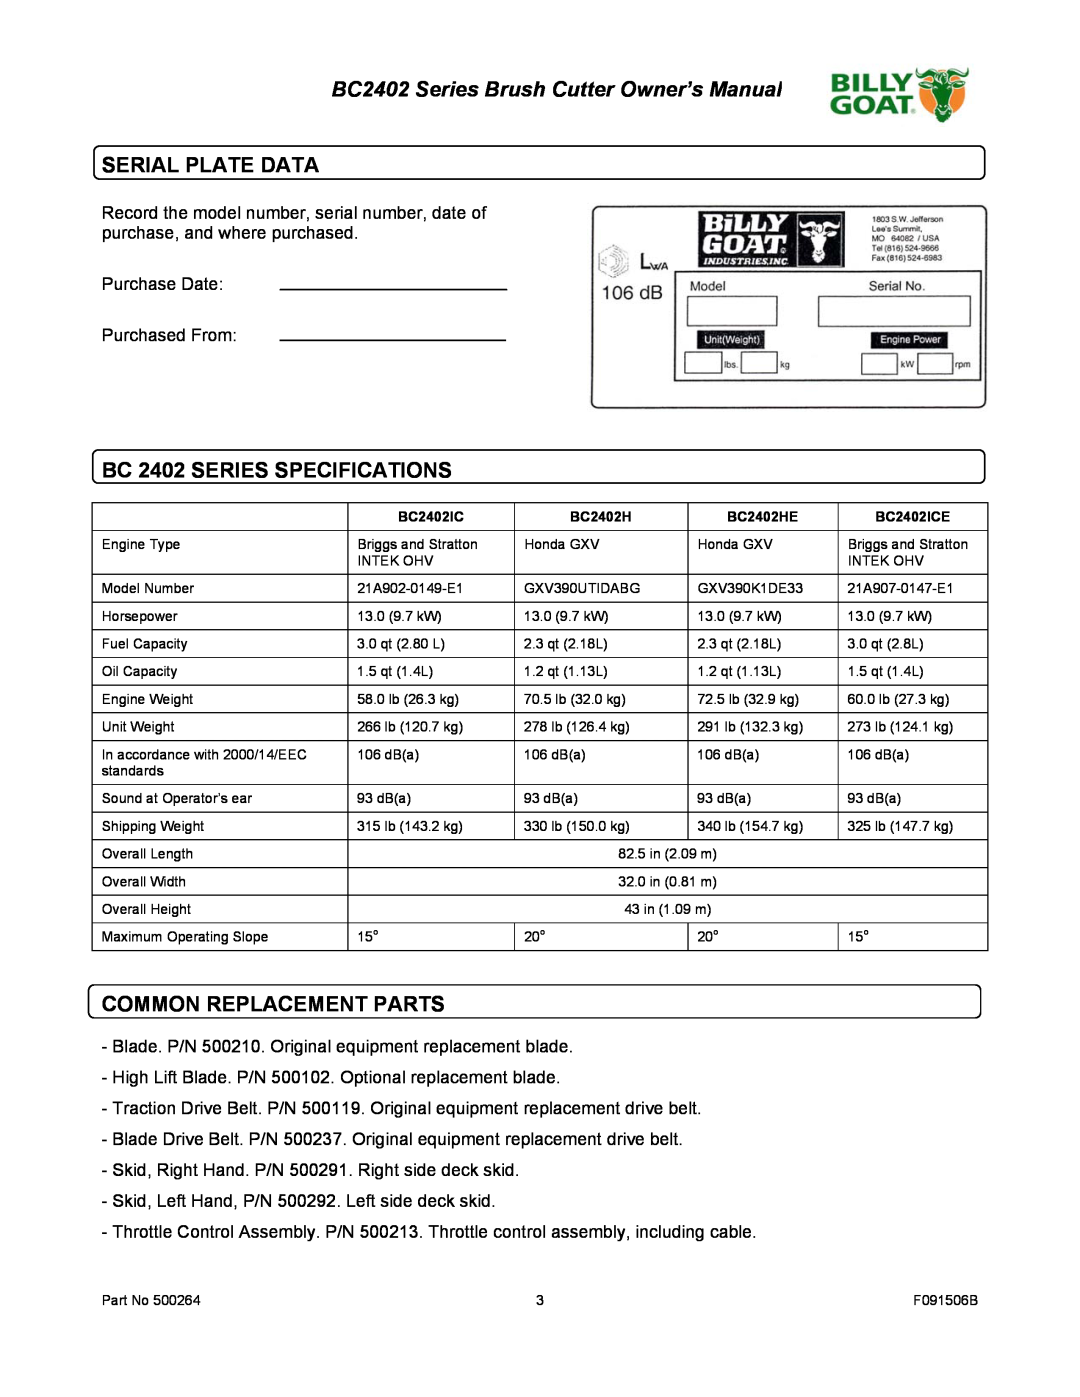 Billy Goat BC2402 owner manual Serial Plate Data, BC 2402 SERIES SPECIFICATIONS, Common Replacement Parts 